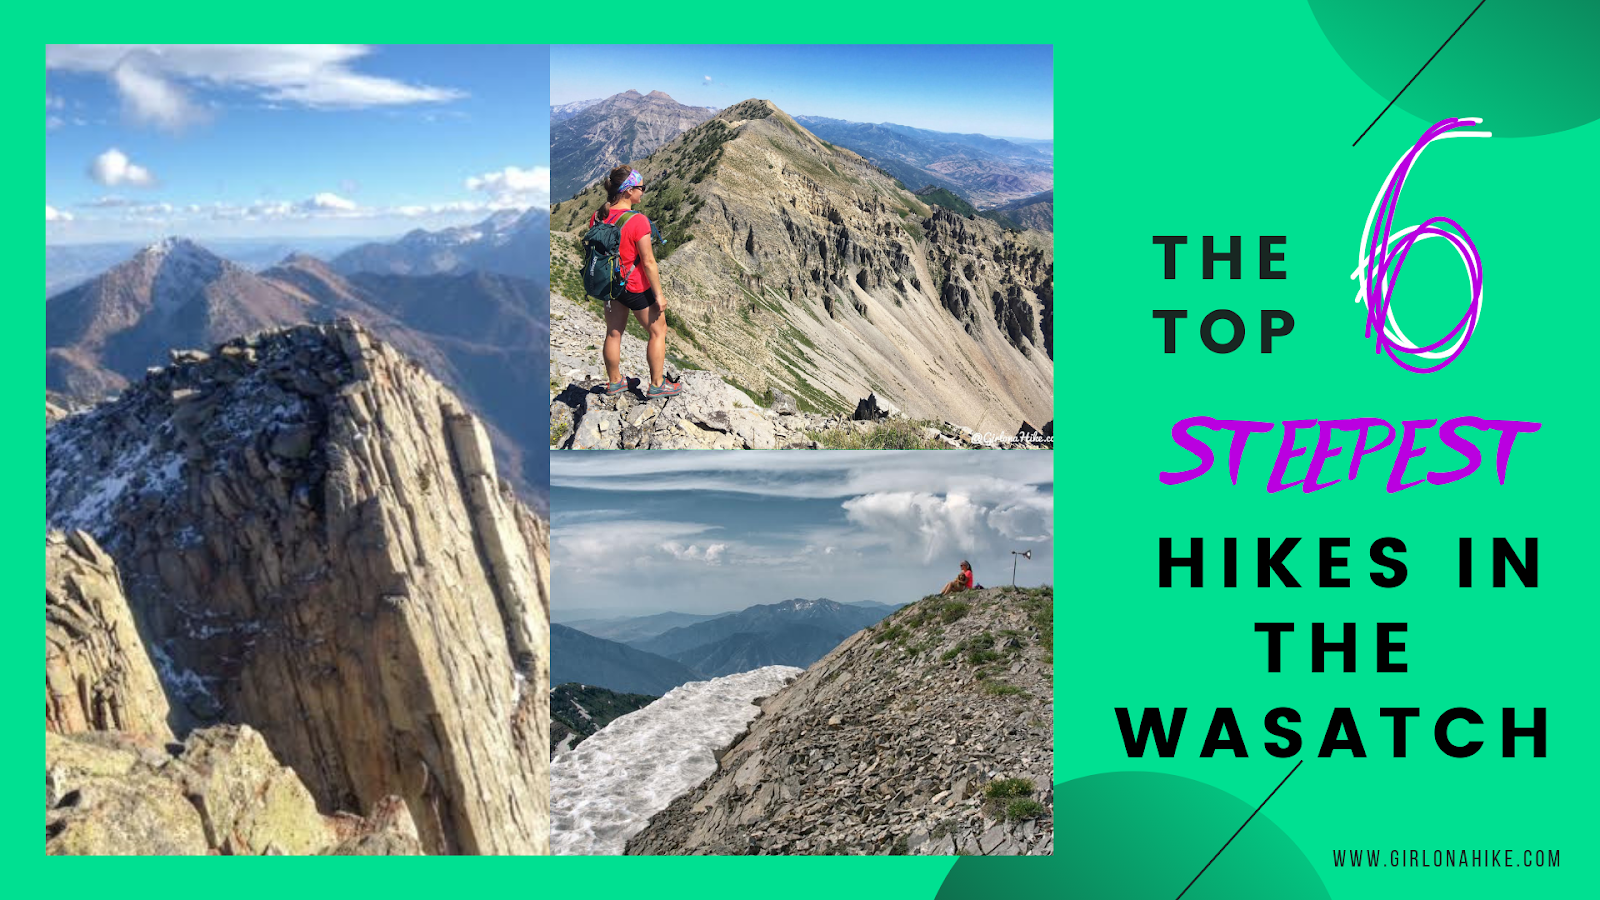 The 6 Steepest Hikes in the Wasatch!